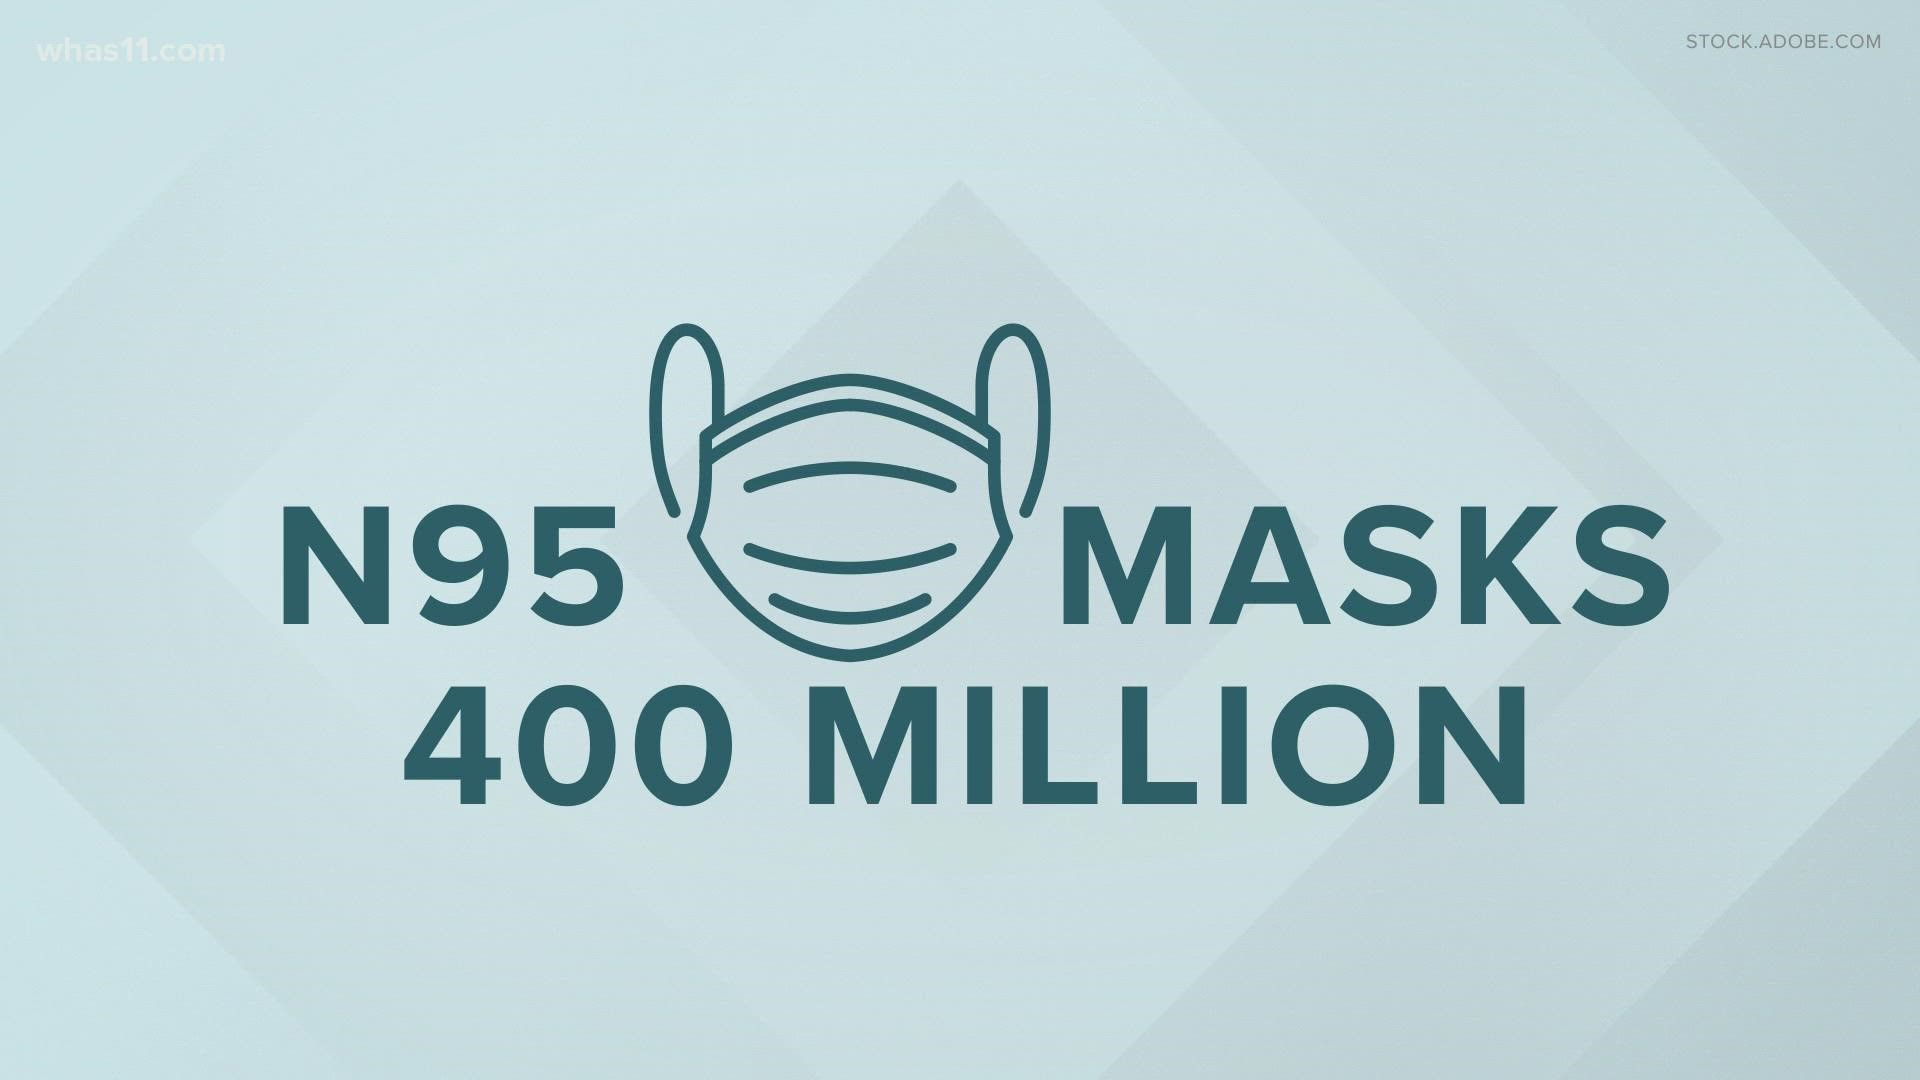 The federal government says 400 million N-95 masks will be available later this week. They will be at local pharmacies and community health centers.